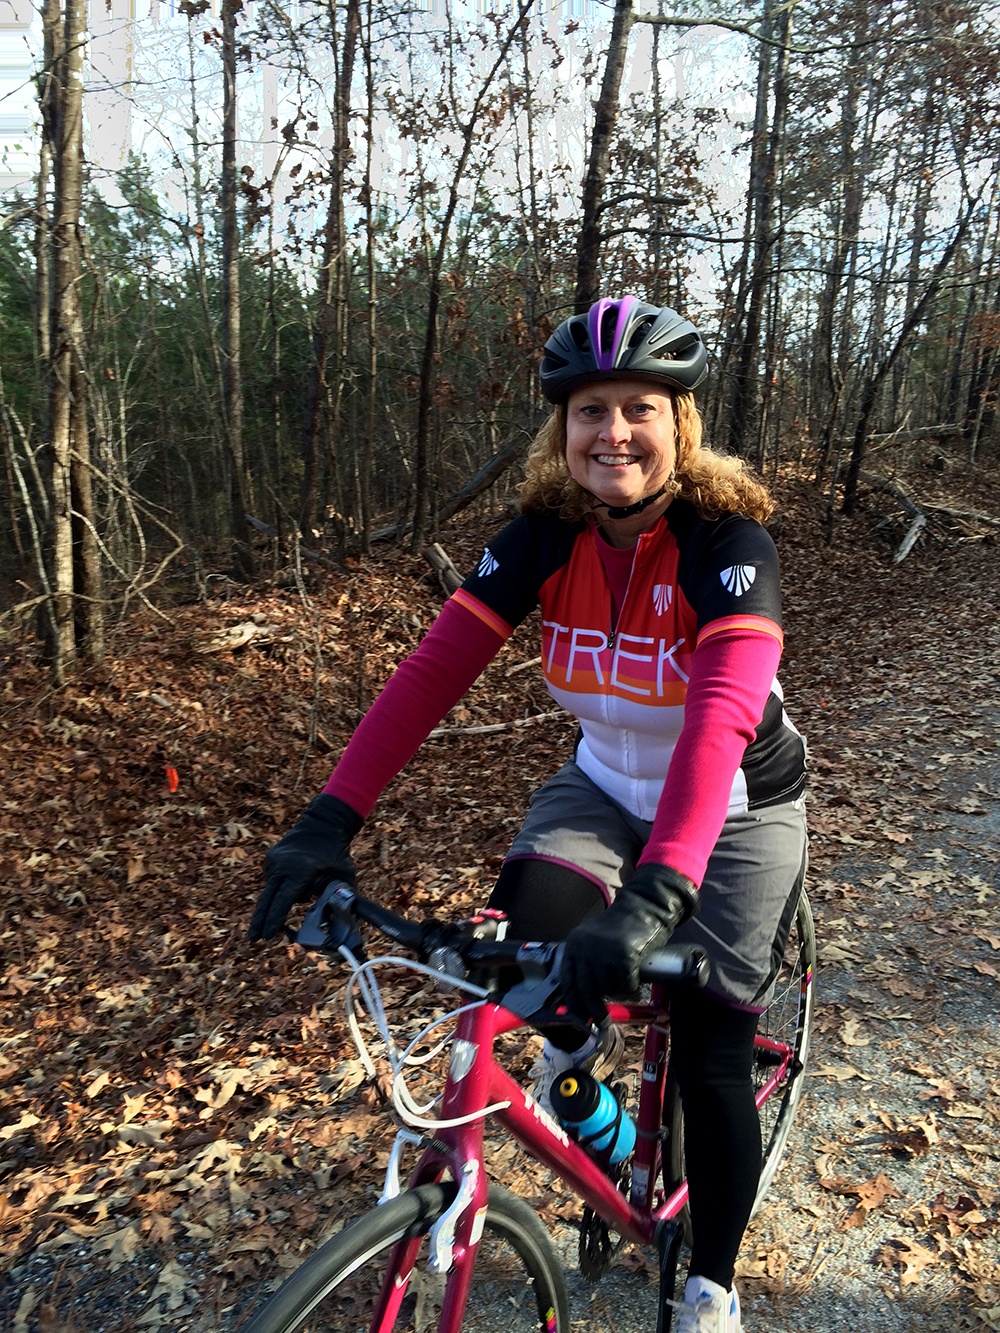 Susie King, mom of Trek Travel guide Zeb King, on why she rides.